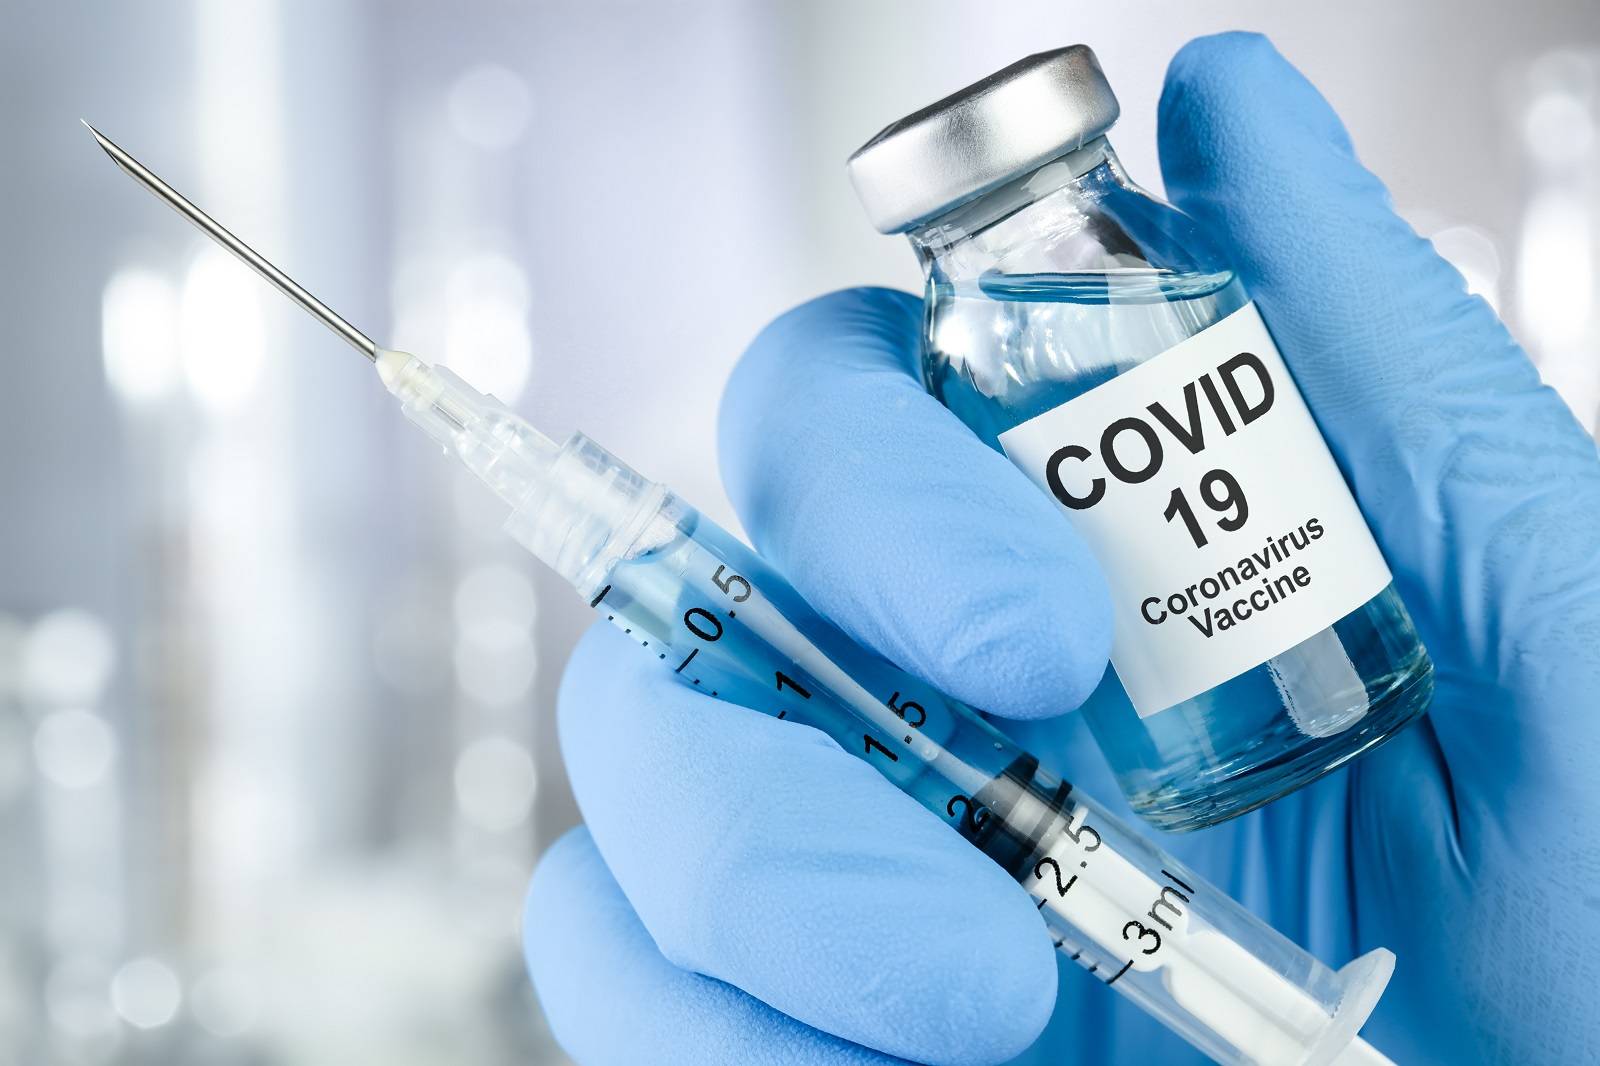 FDA is about to authorize Moderna’s COVID-19 vaccine – here’s how it differs from Pfizer’s